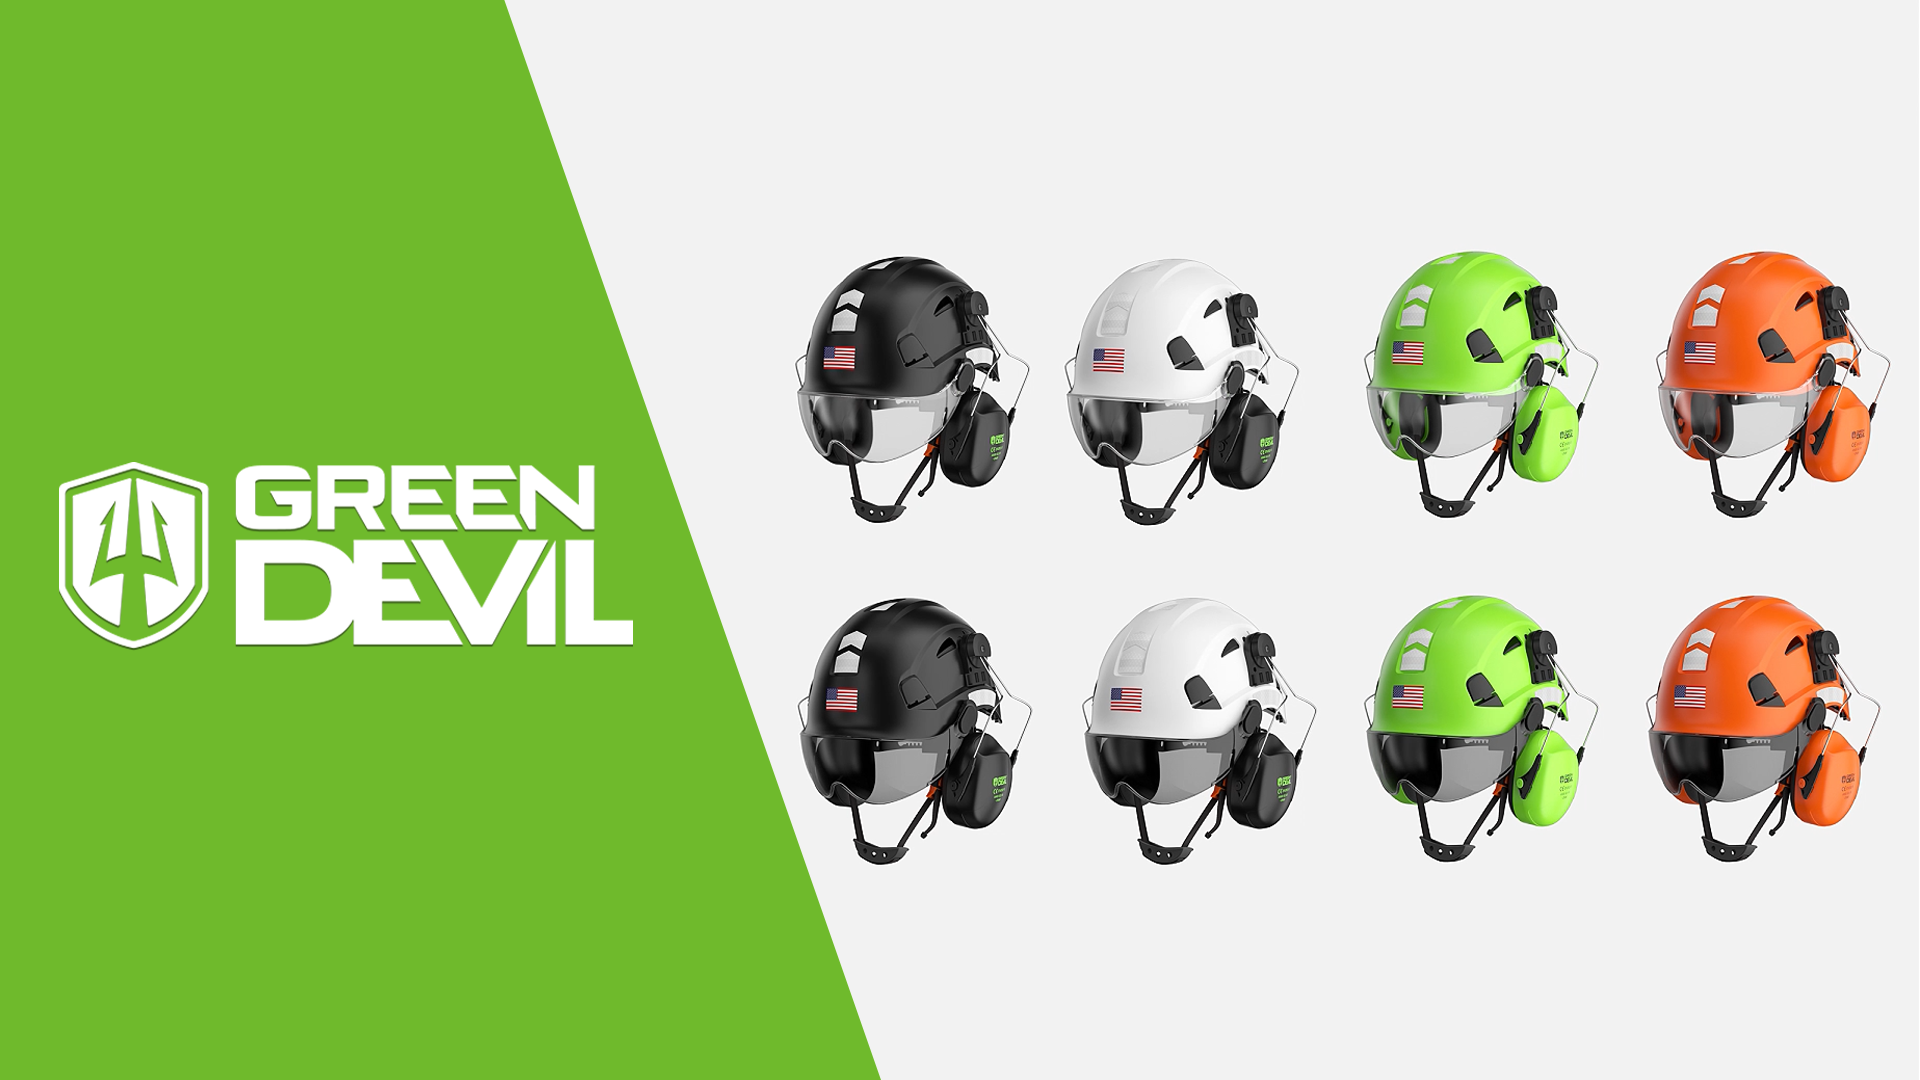 GreenDevil Hard Hat: Maximum Protection and Comfort for Industrial and Construction Workers